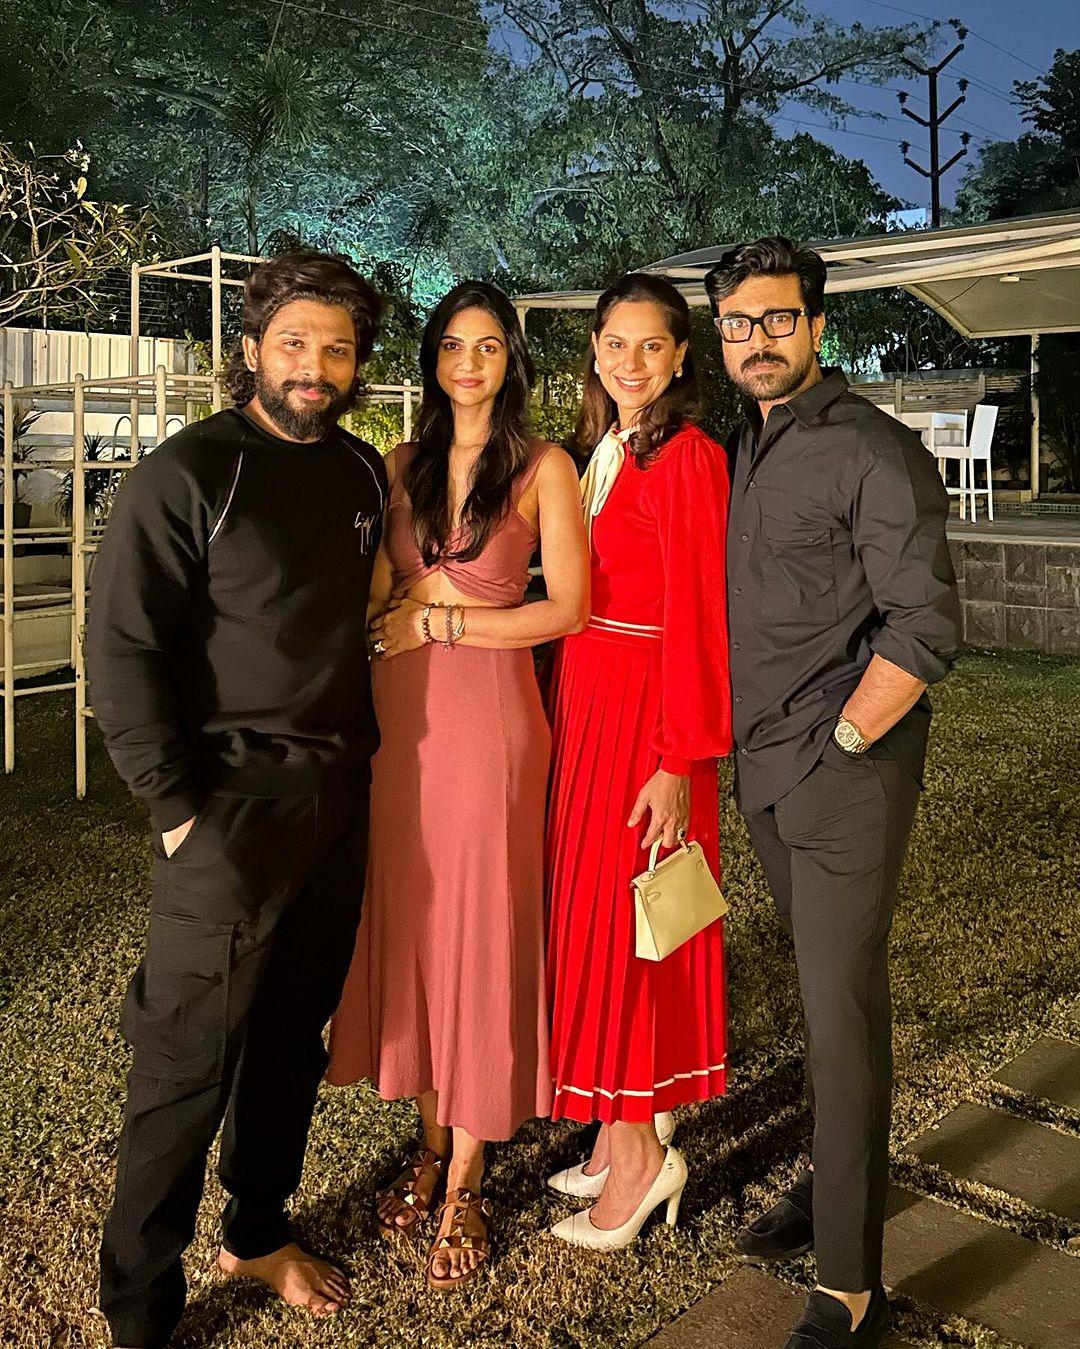 Allu Arjun with wife Sneha, Ram Charan and his wife Upasana were present at the party. They also shared several photos from the bash